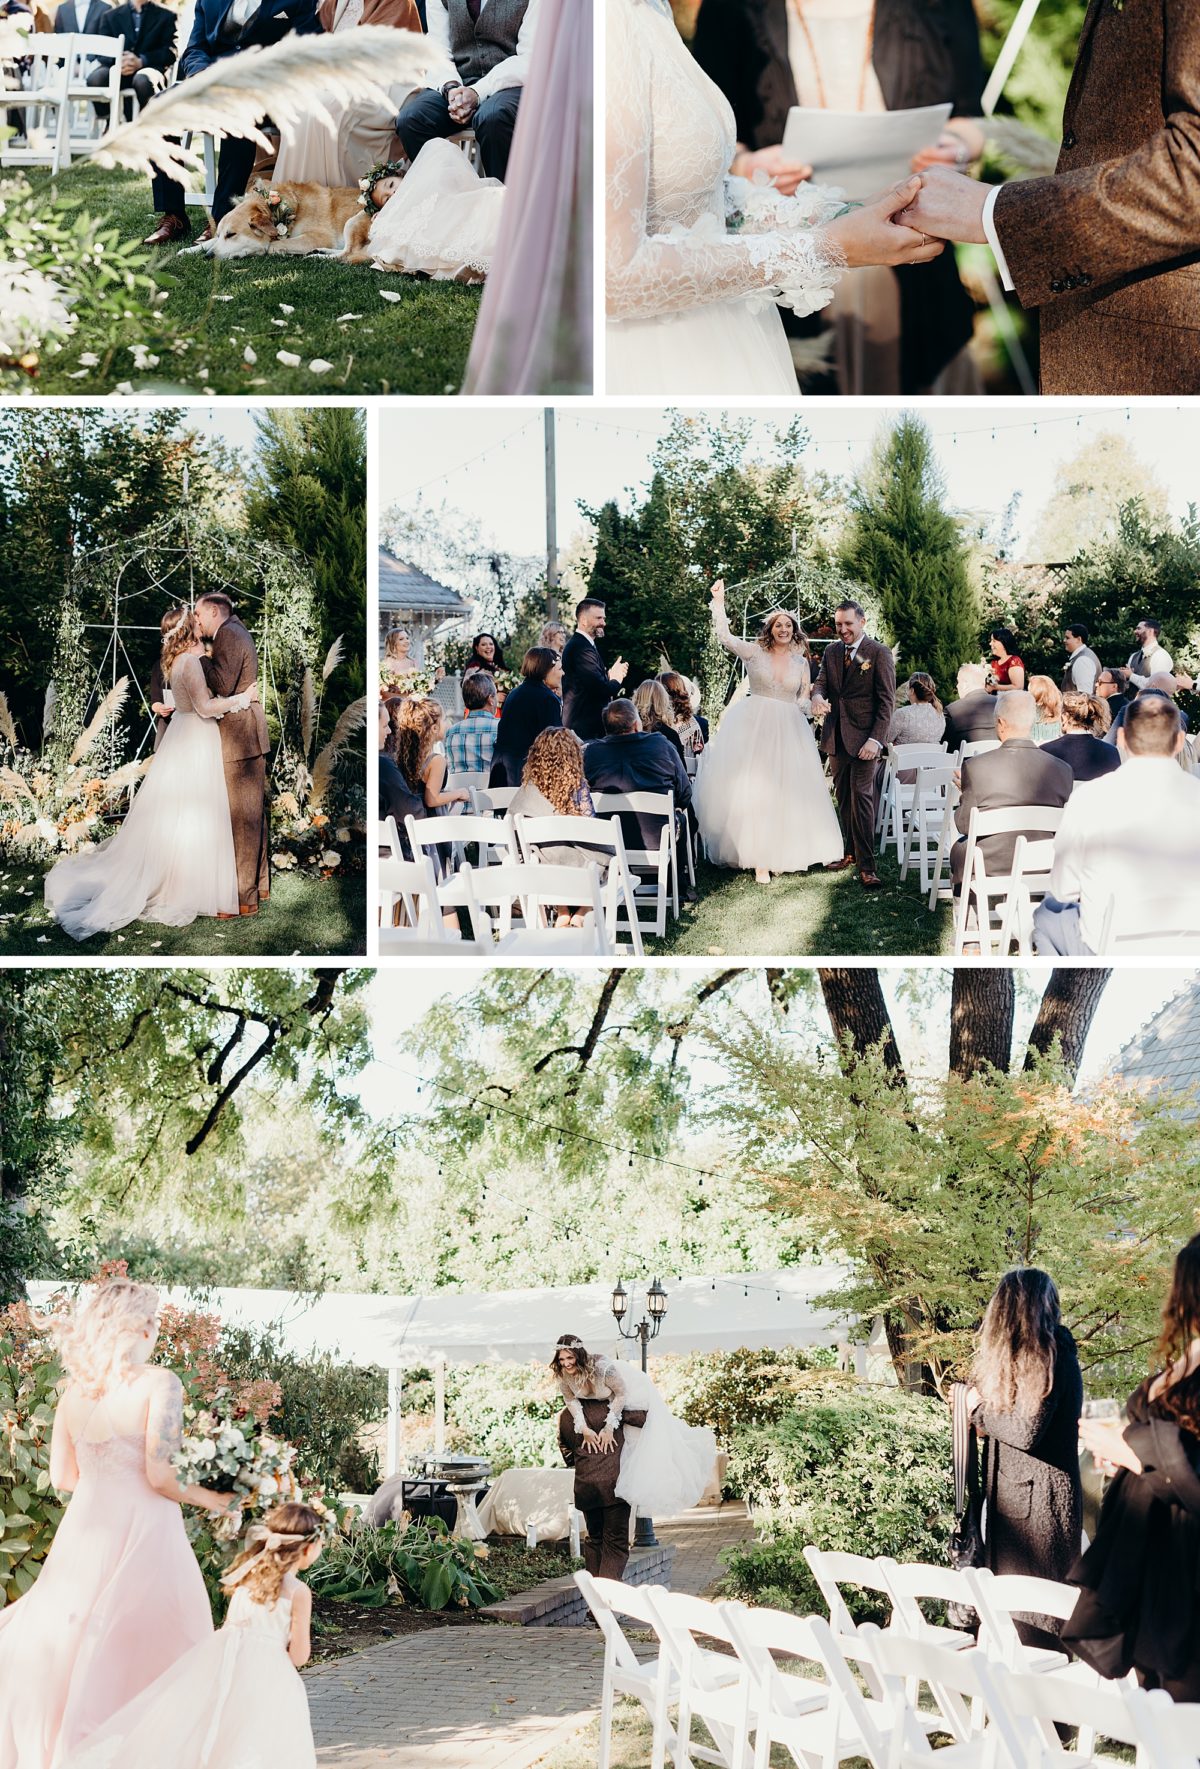 A beautiful bohemian outdoor wedding ceremony in Portland, Oregon. Photographed by Pacific Northwest Wedding Photographer, Briana Morrison